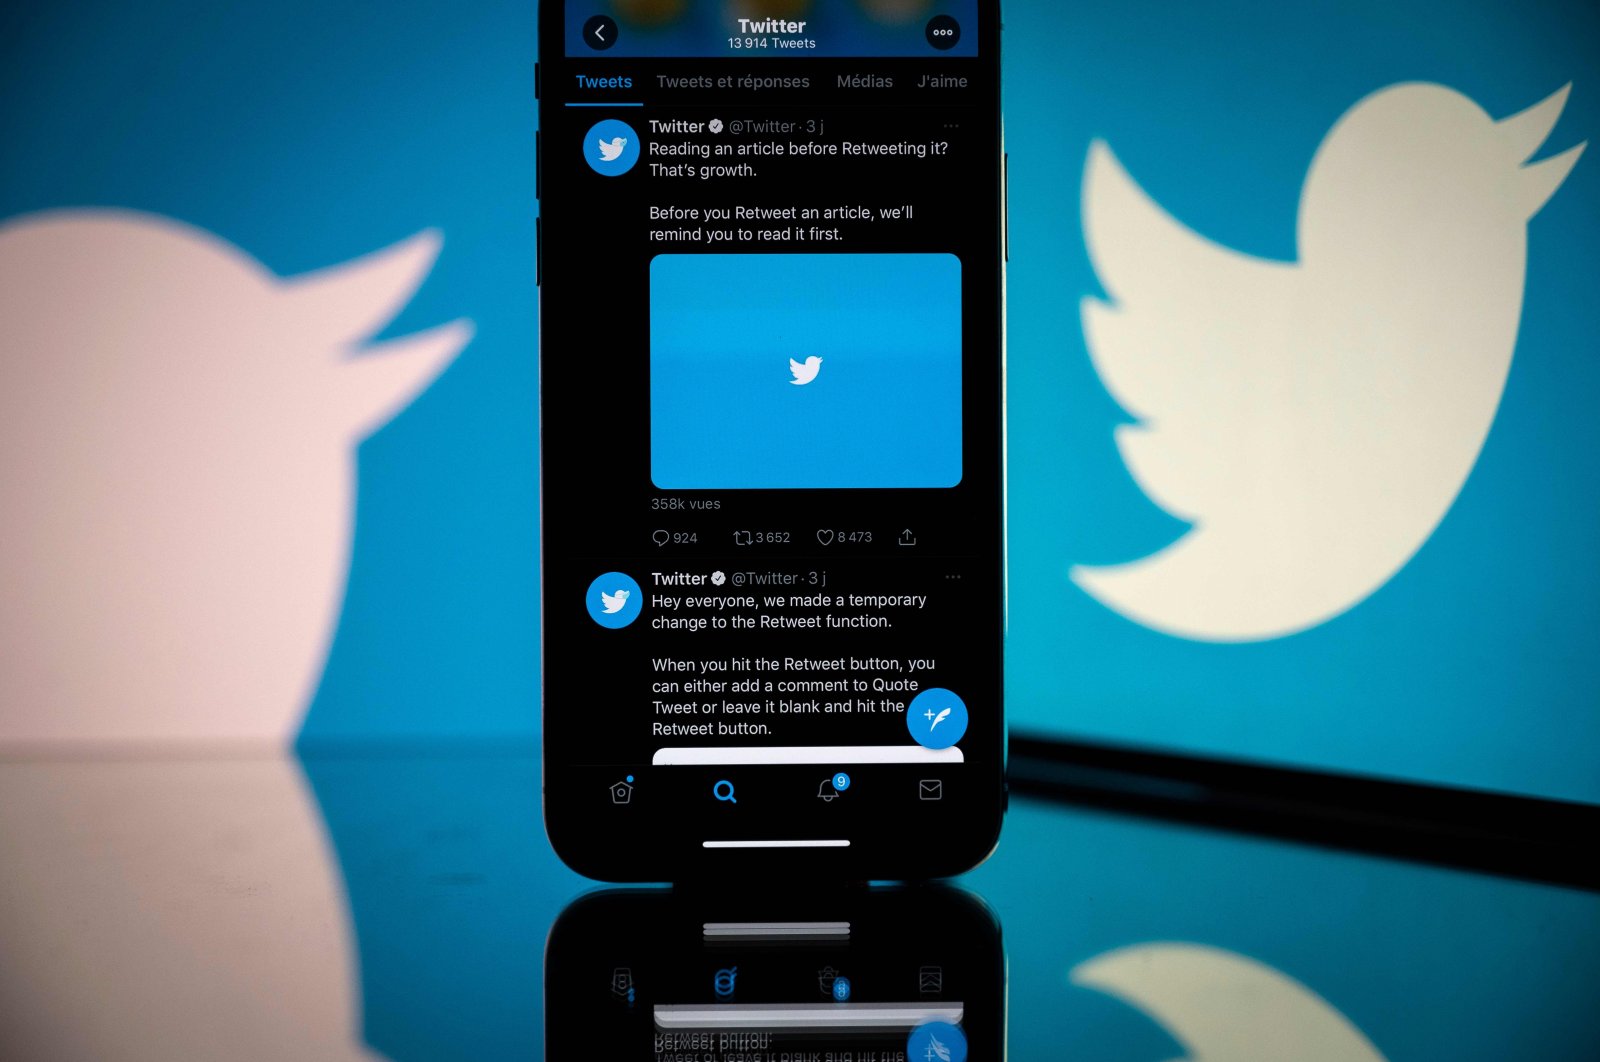 The logo of U.S. social network Twitter is displayed on the screen of a smartphone and a tablet in Toulouse, southern France, Oct. 26, 2020. (AFP Photo)